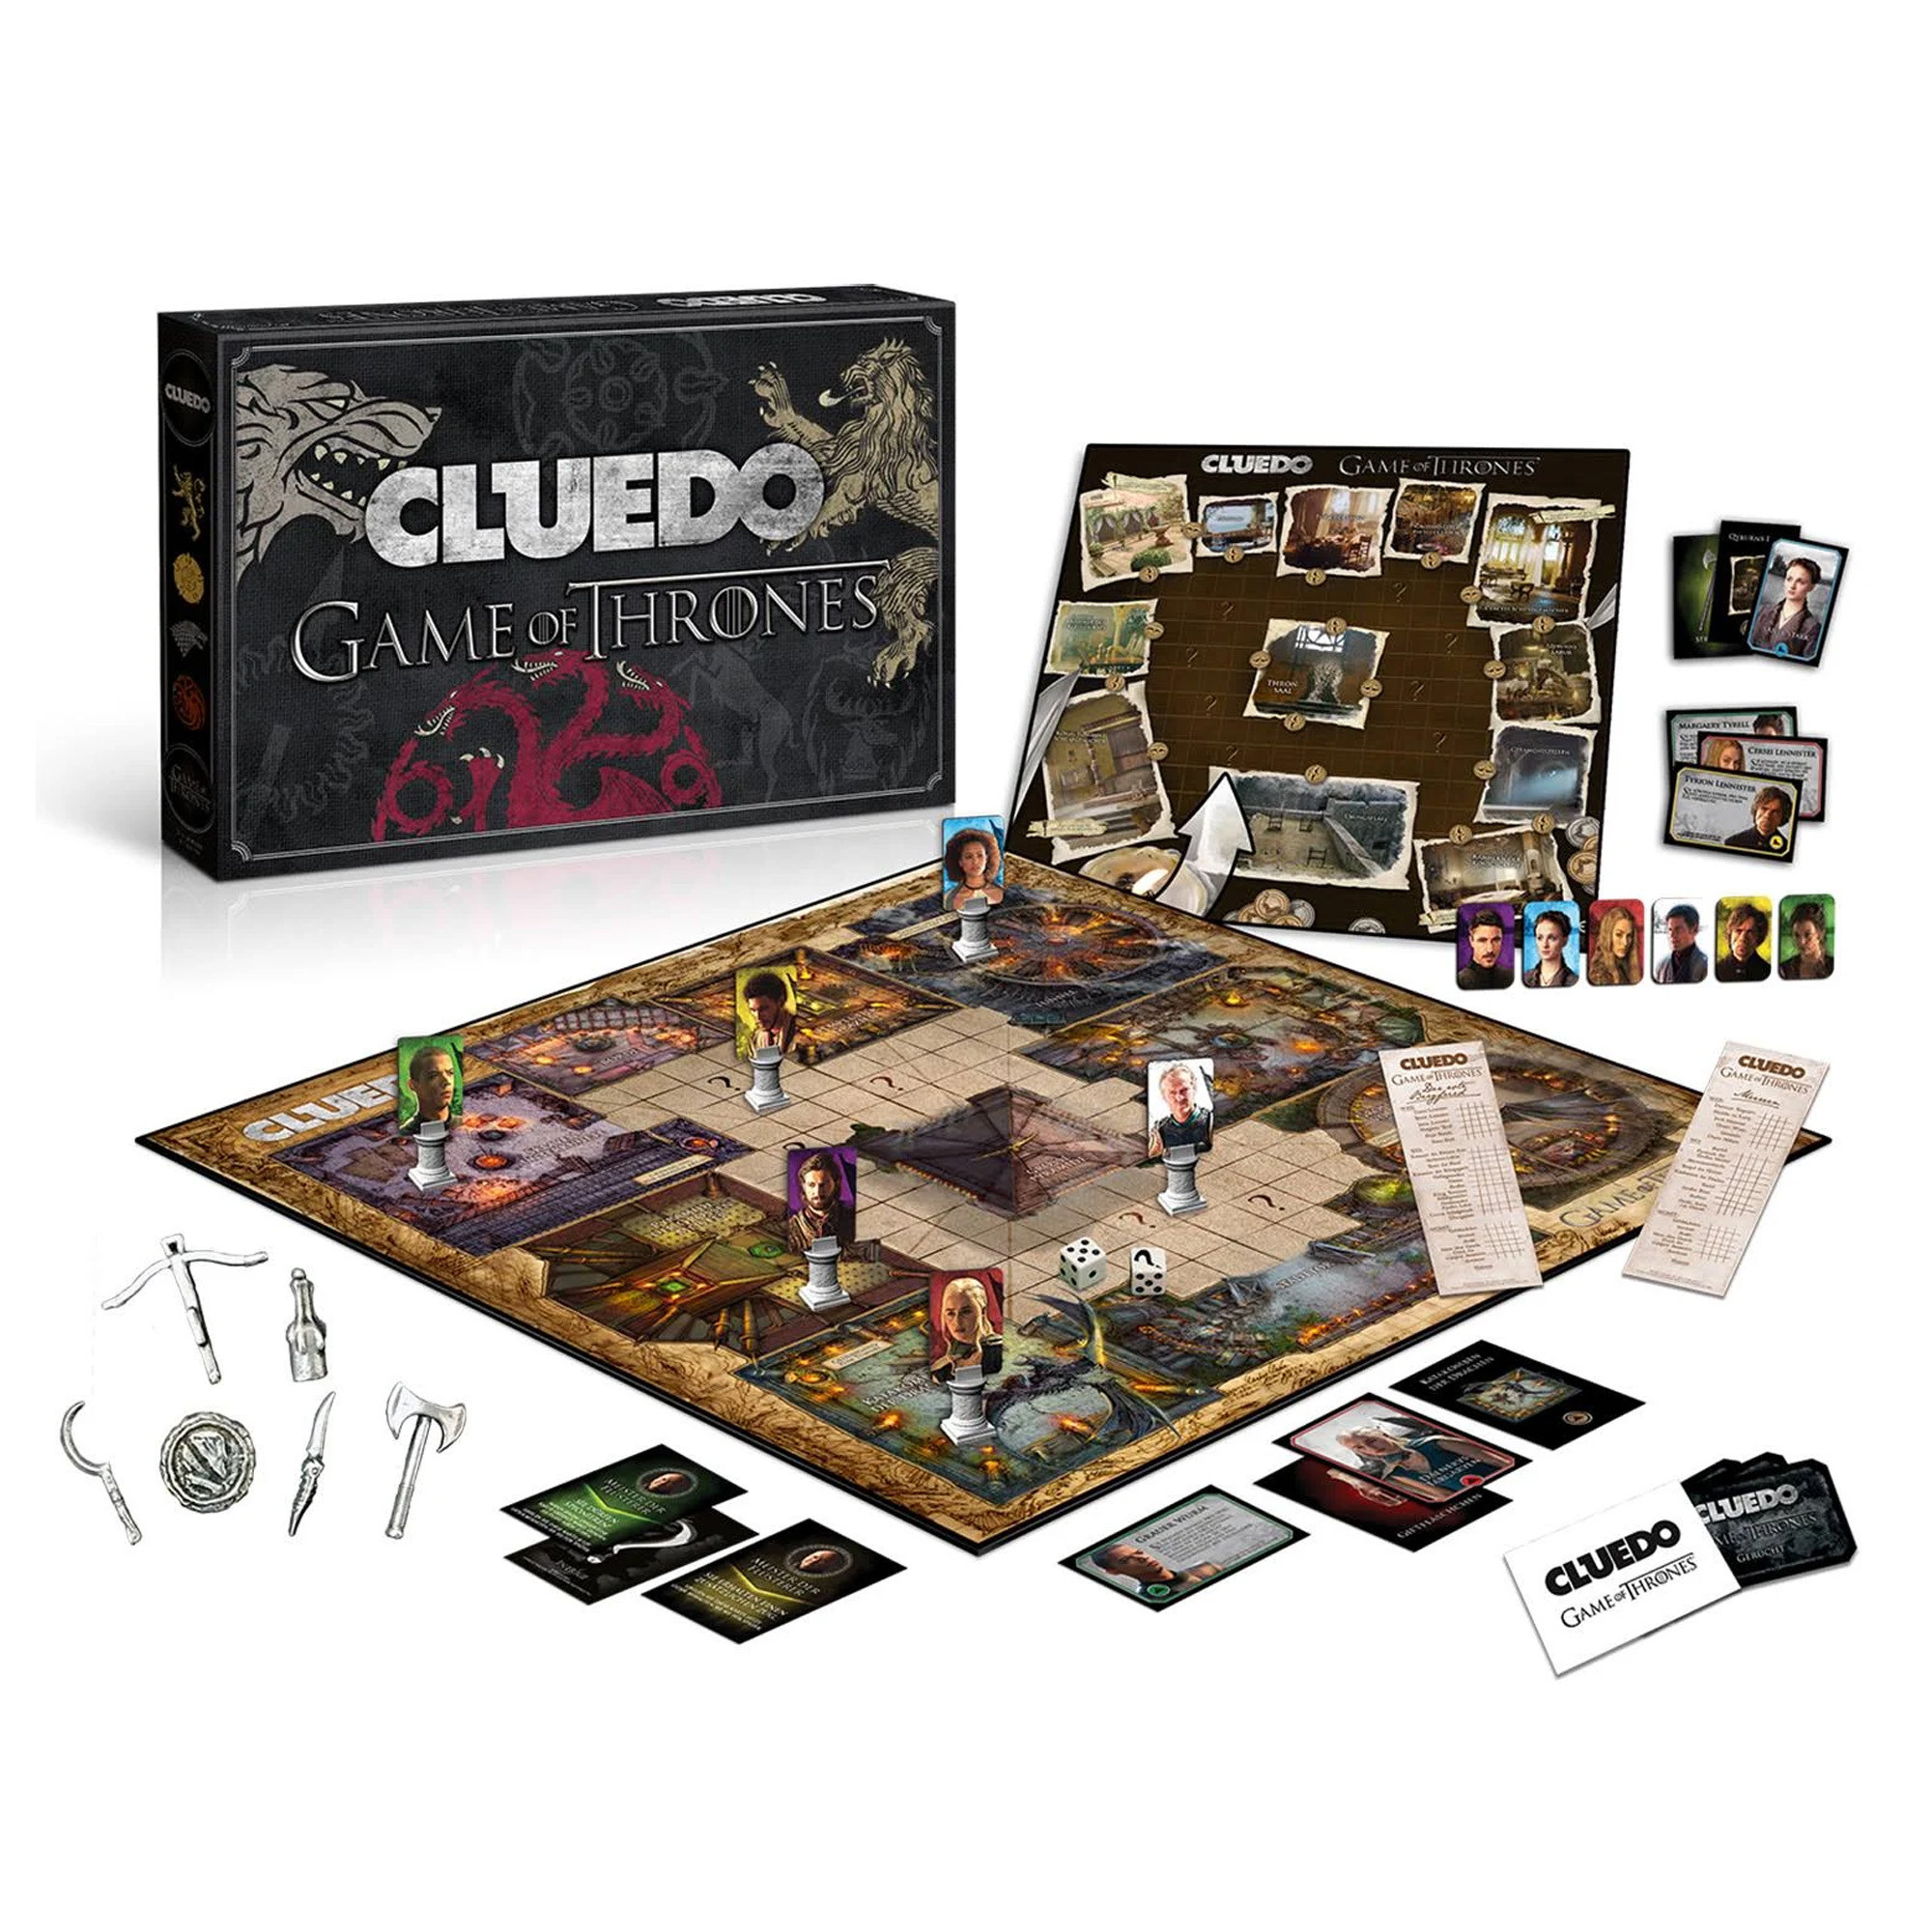 Cluedo Game of Thrones (Collector's Edition)